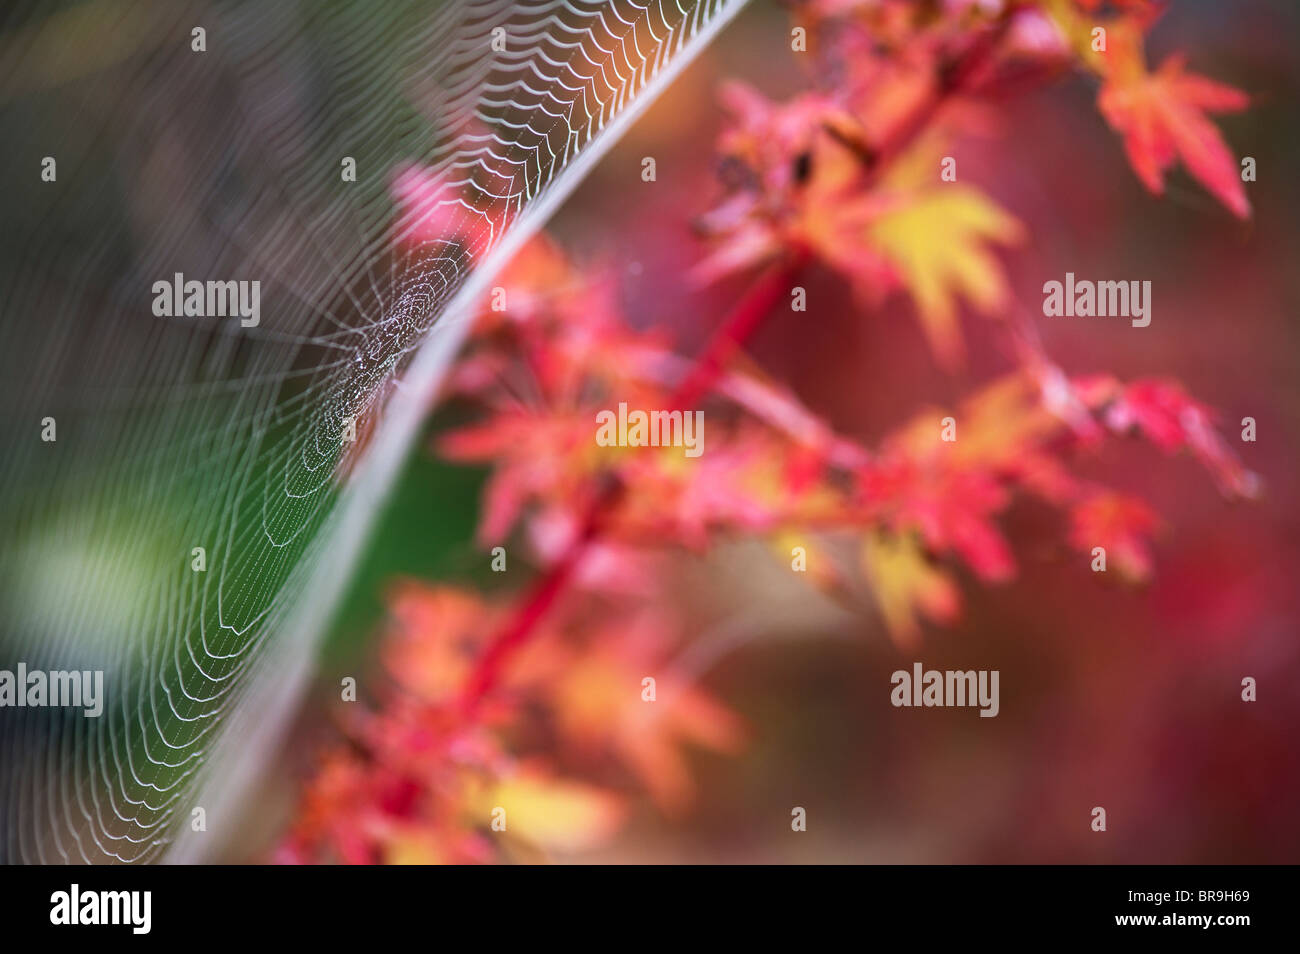 Spiders web in a garden in front of an acer tree Stock Photo